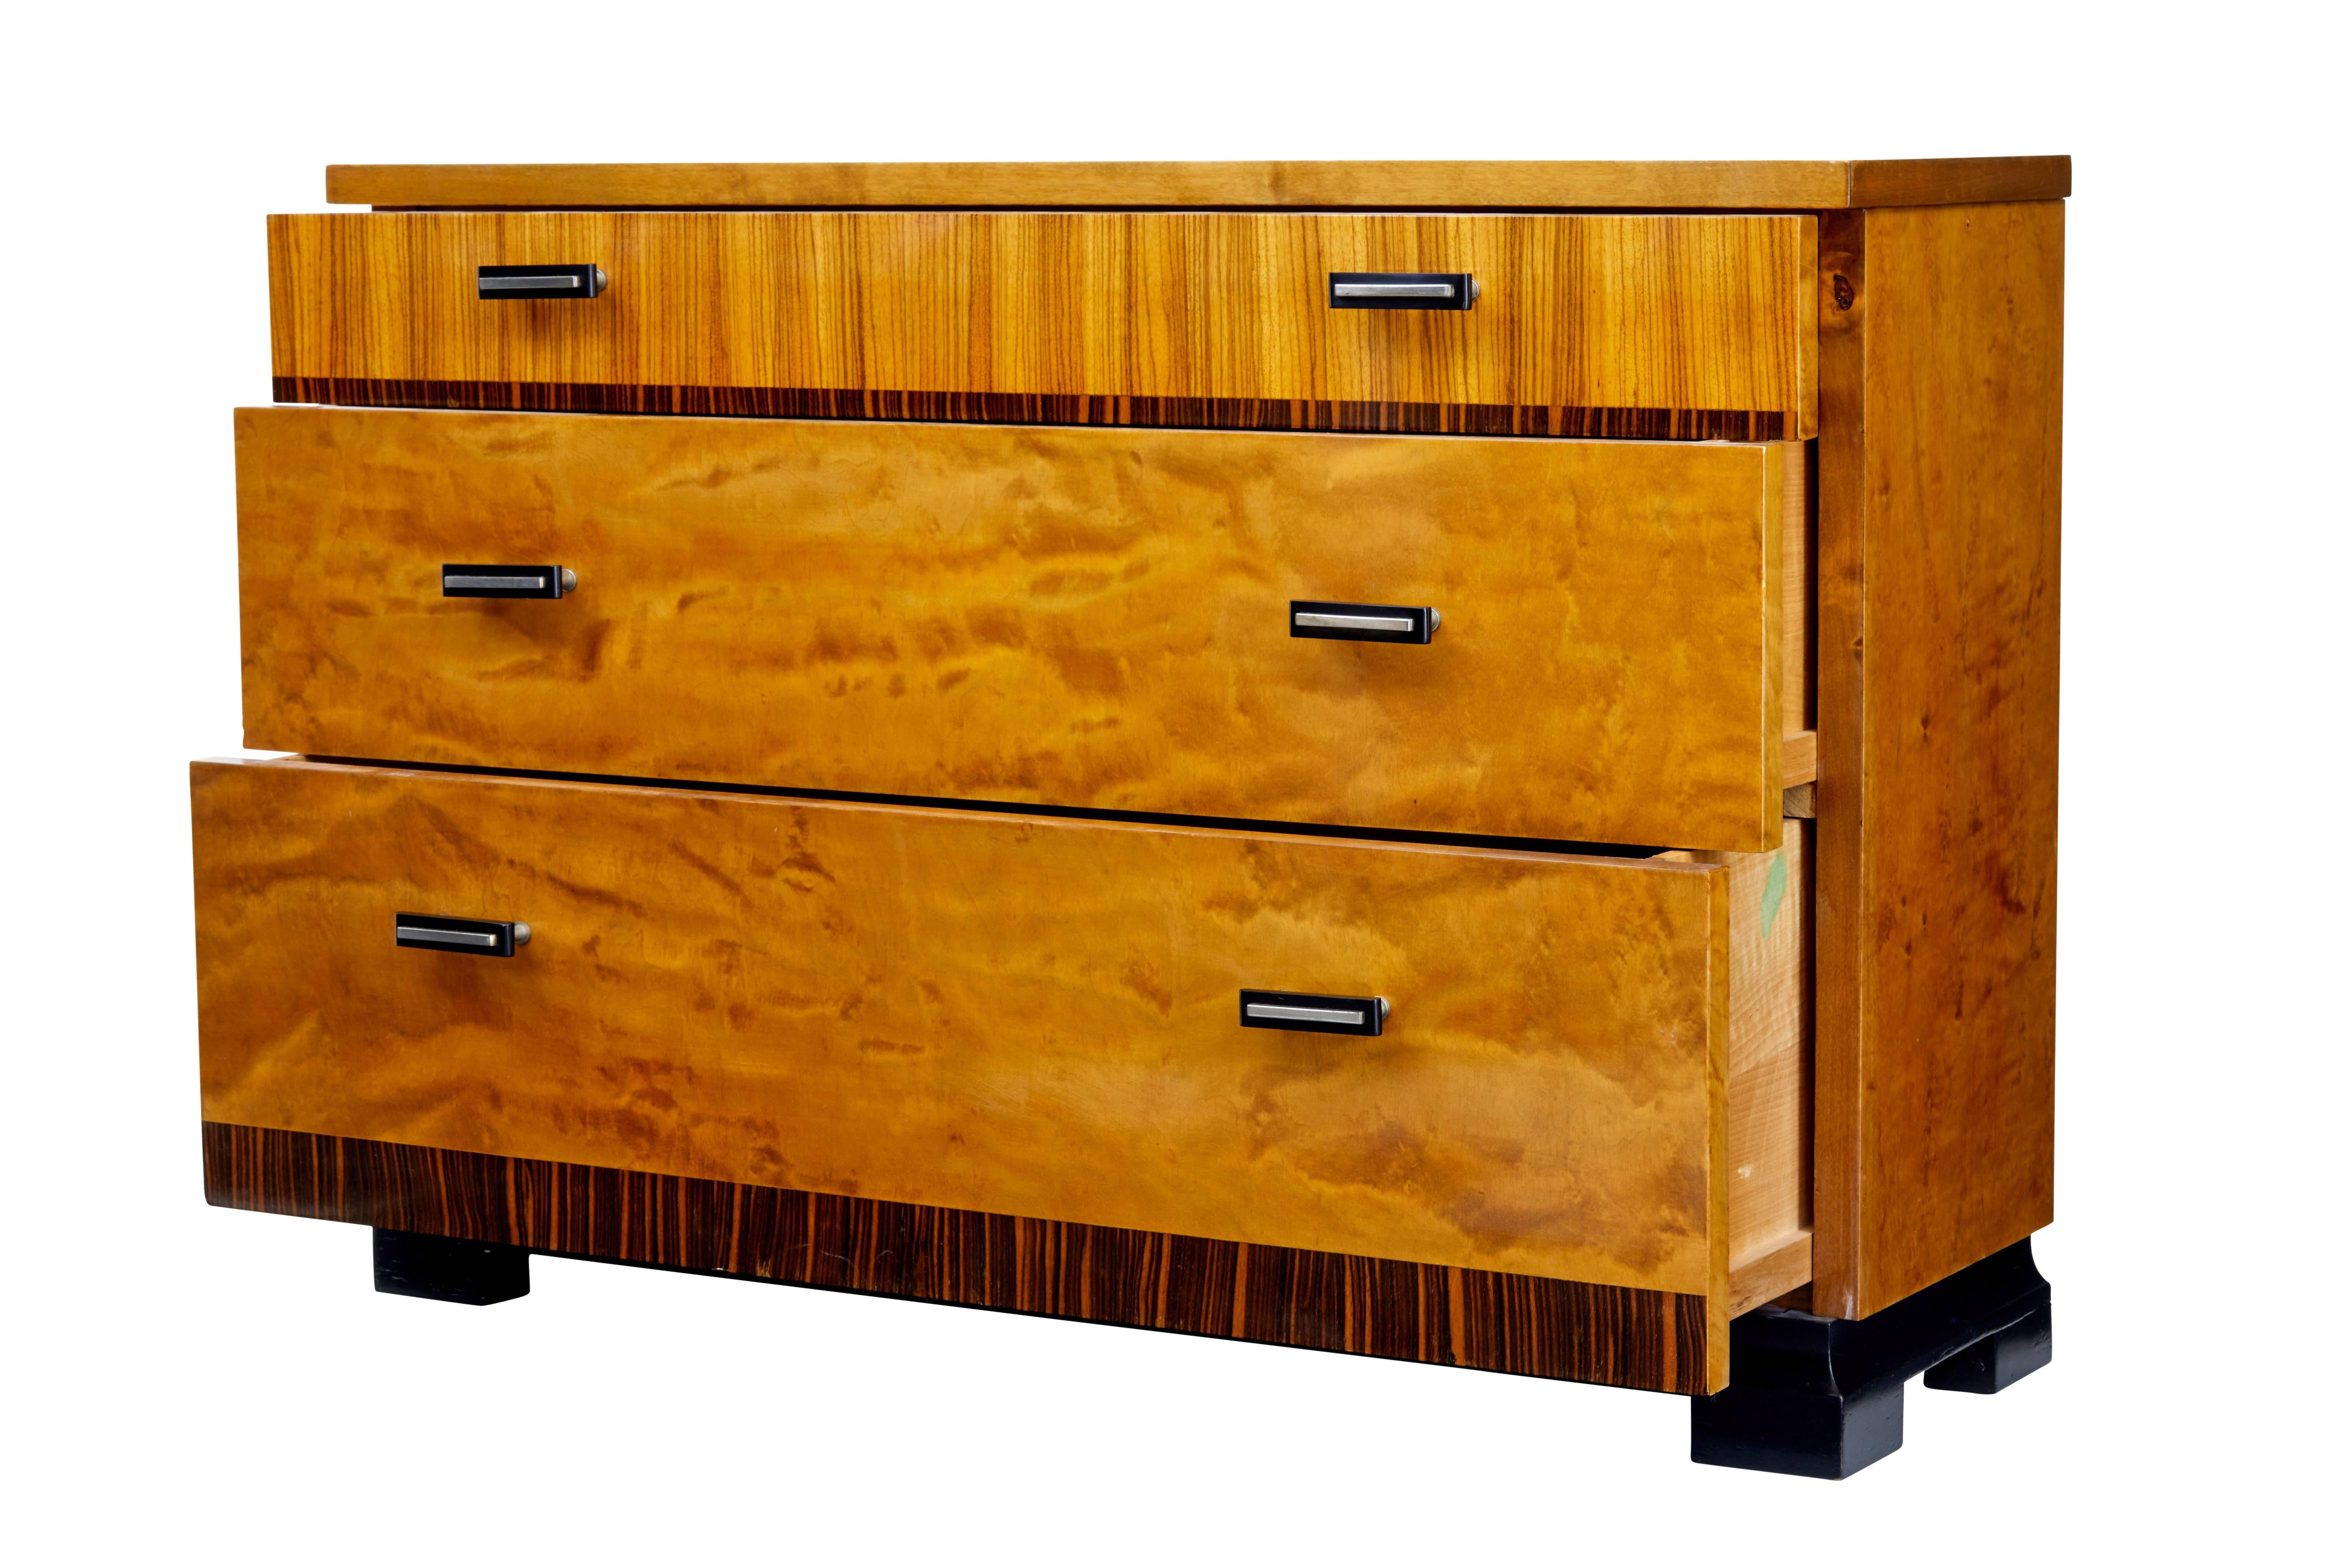 Stunning Art Deco inspired narrow chest of drawers, circa 1950.
Made with stunning birch and rosewood veneers. Standing on ebonized sledge feet.
Three graduating drawers with ebonized and steel handles.
Minor surface marks
Measures: Height 26